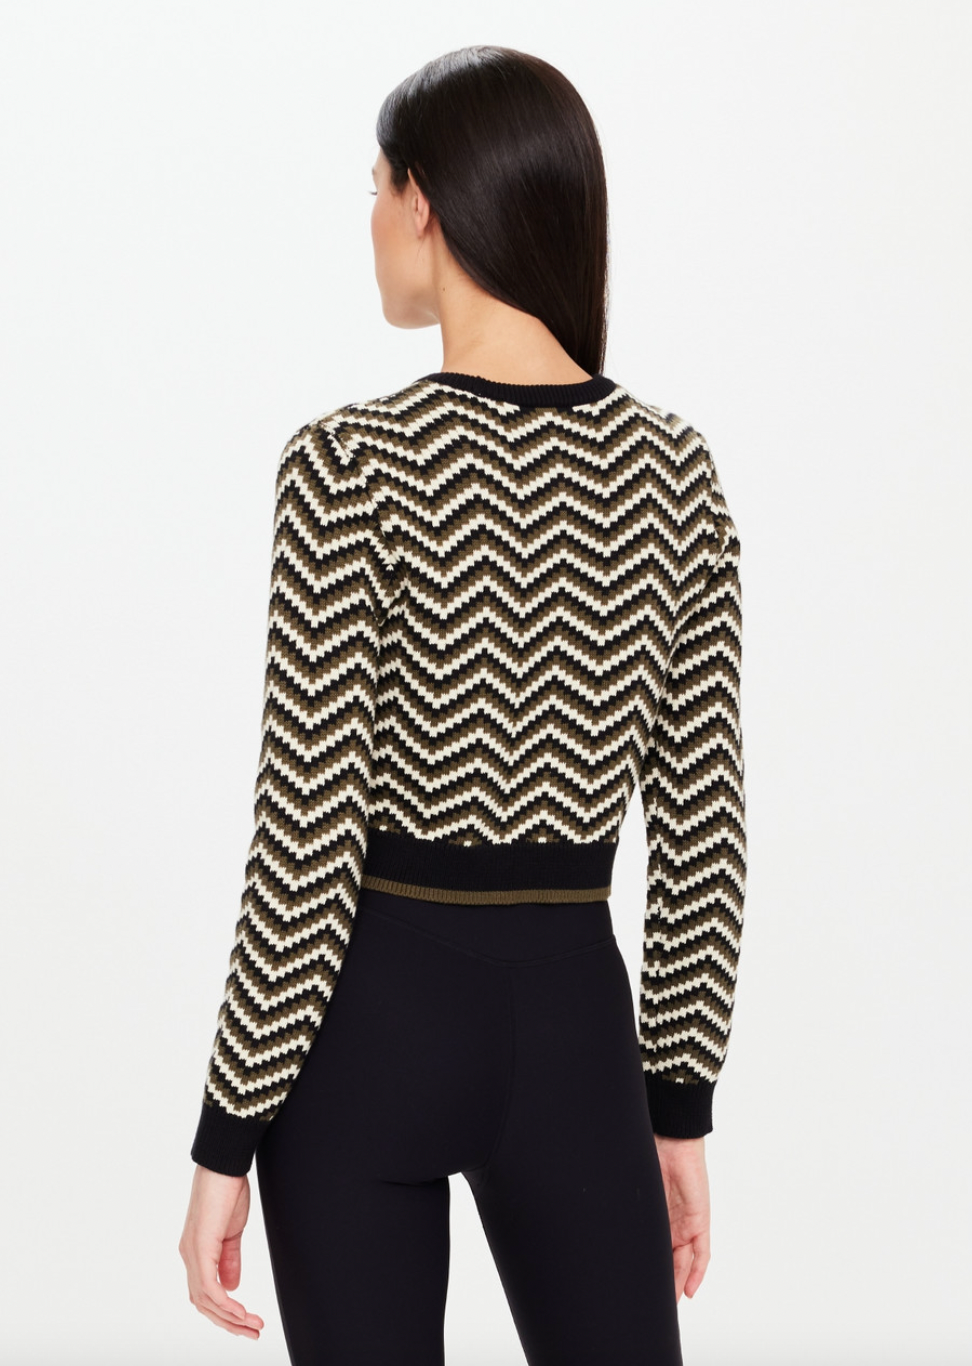 Product Image for Ziggy Karlie Knit Top, Multi